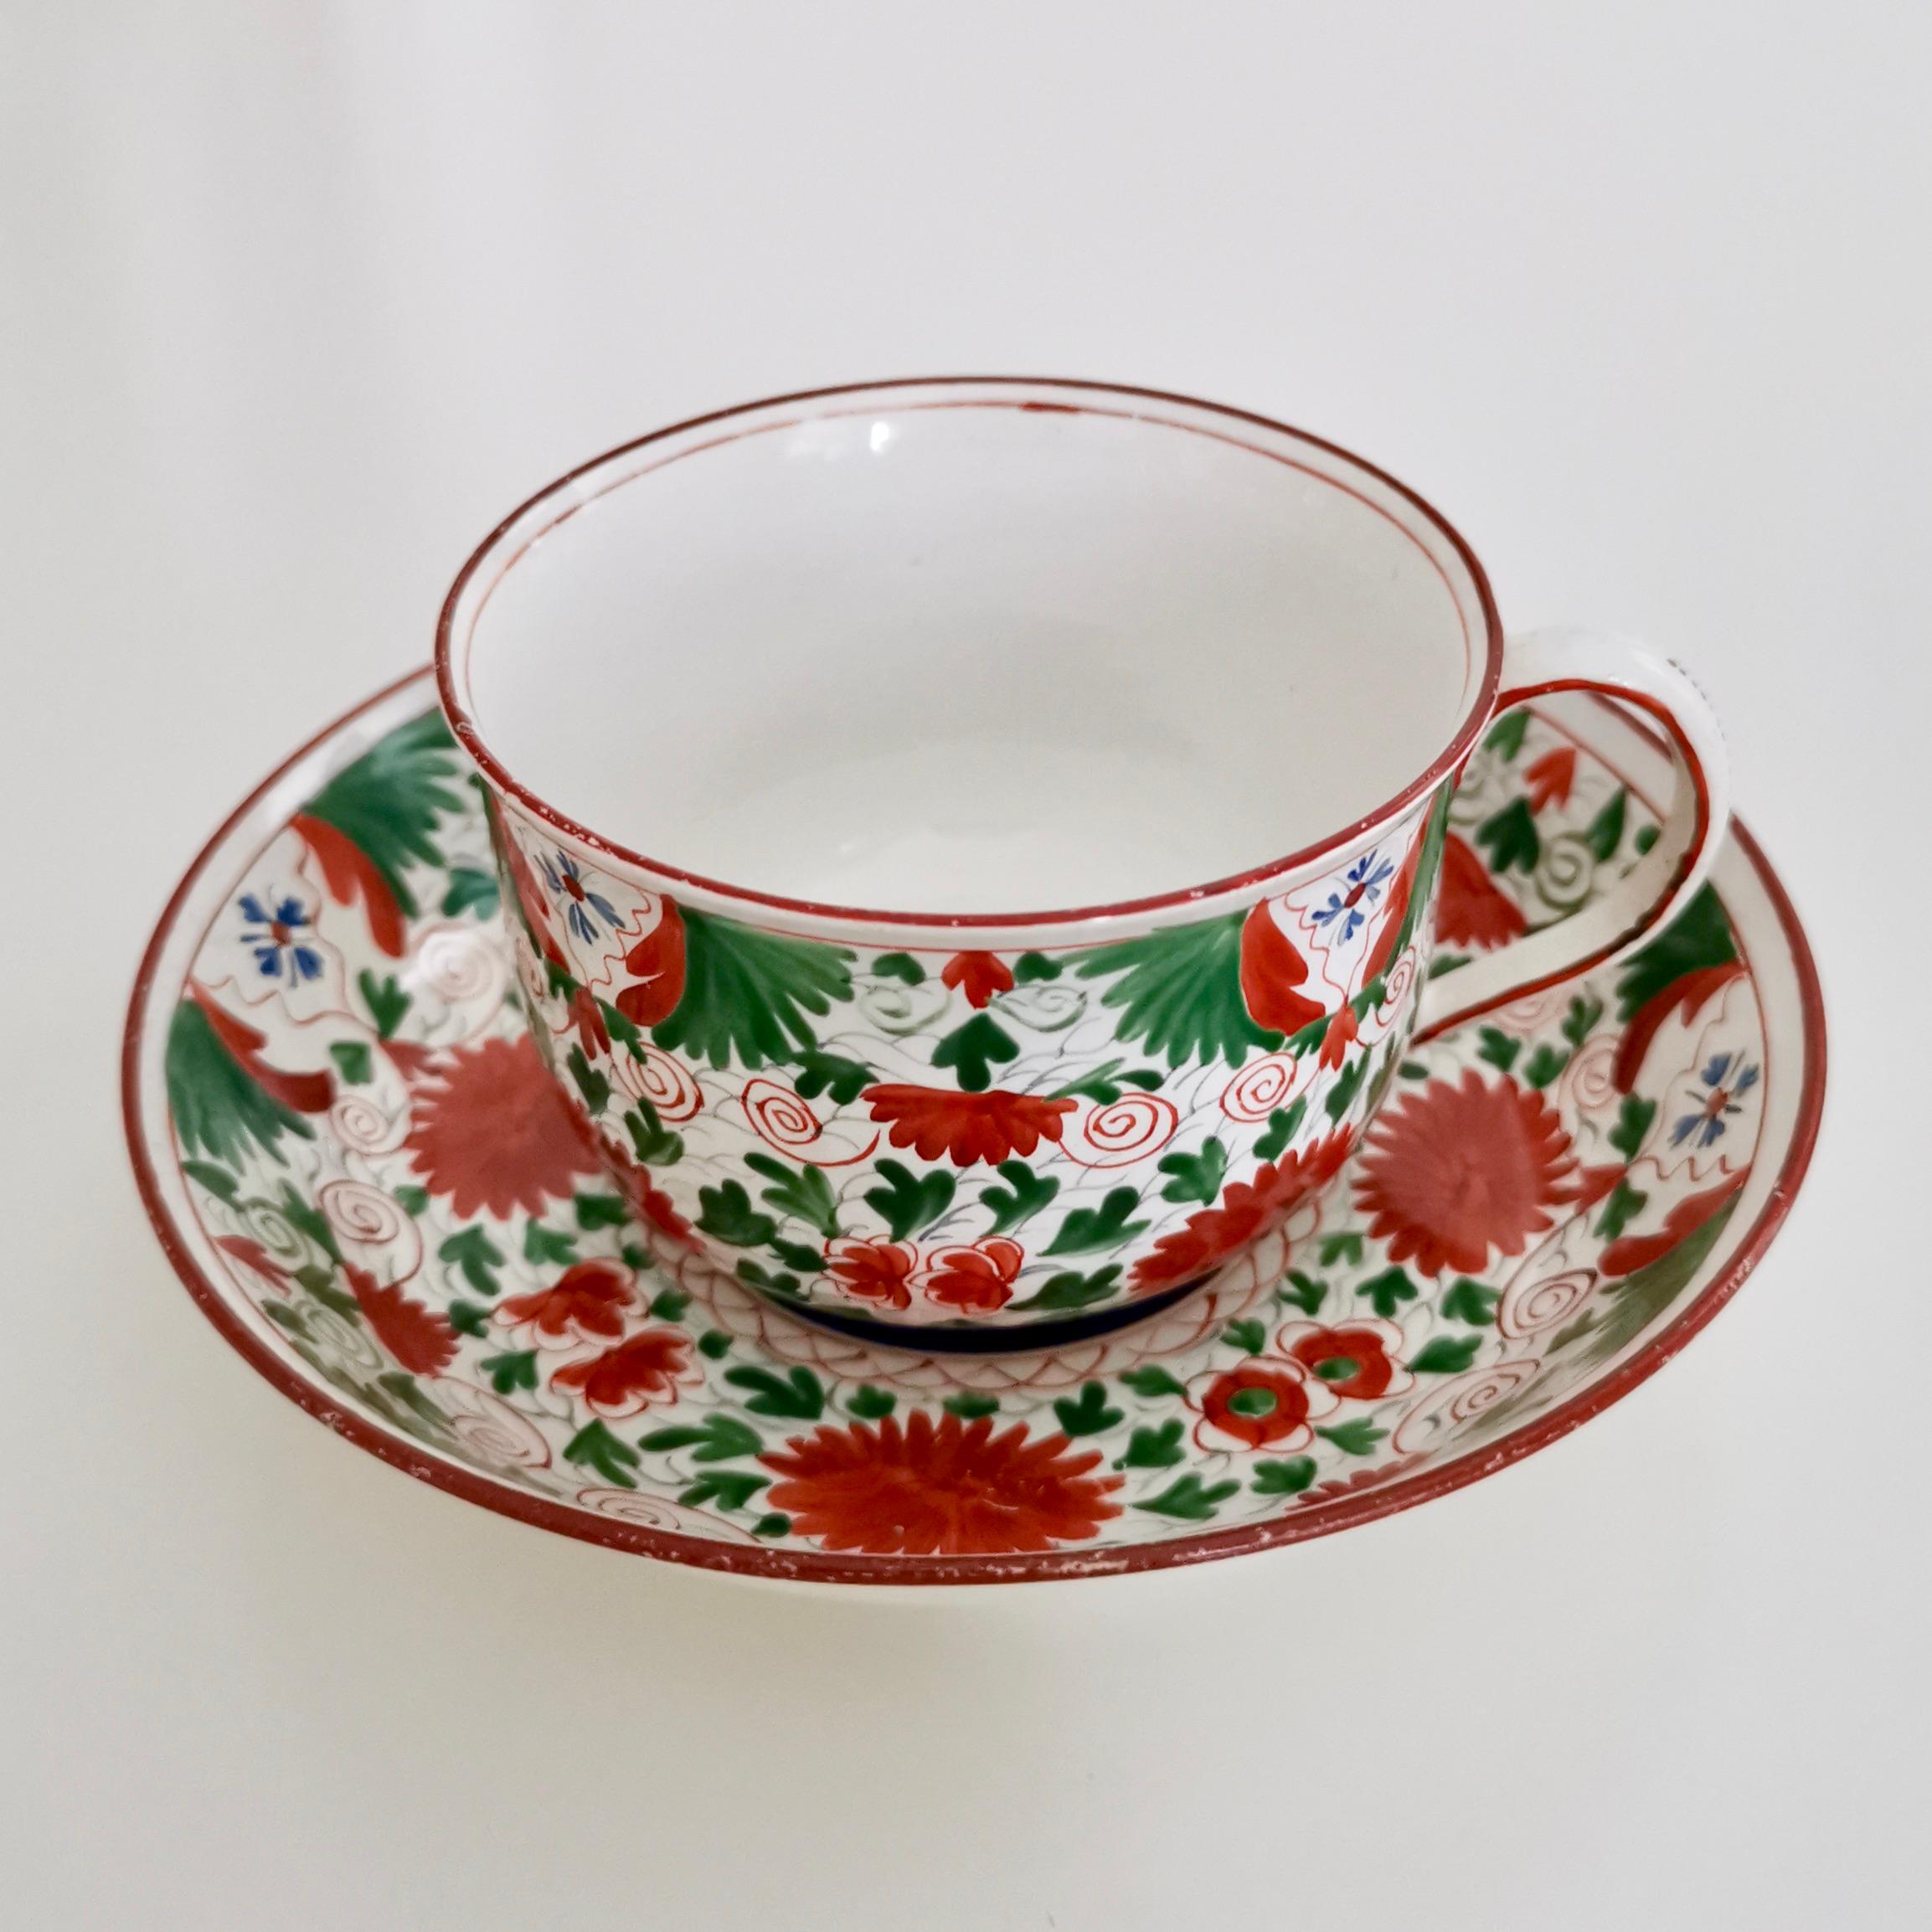 This is a beautifully hand painted teacup and saucer made by Minton around the year 1805.

Minton was one of the pioneers of English china production alongside other great potters such as Spode, Davenport, Ridgway, Coalport and others. They were